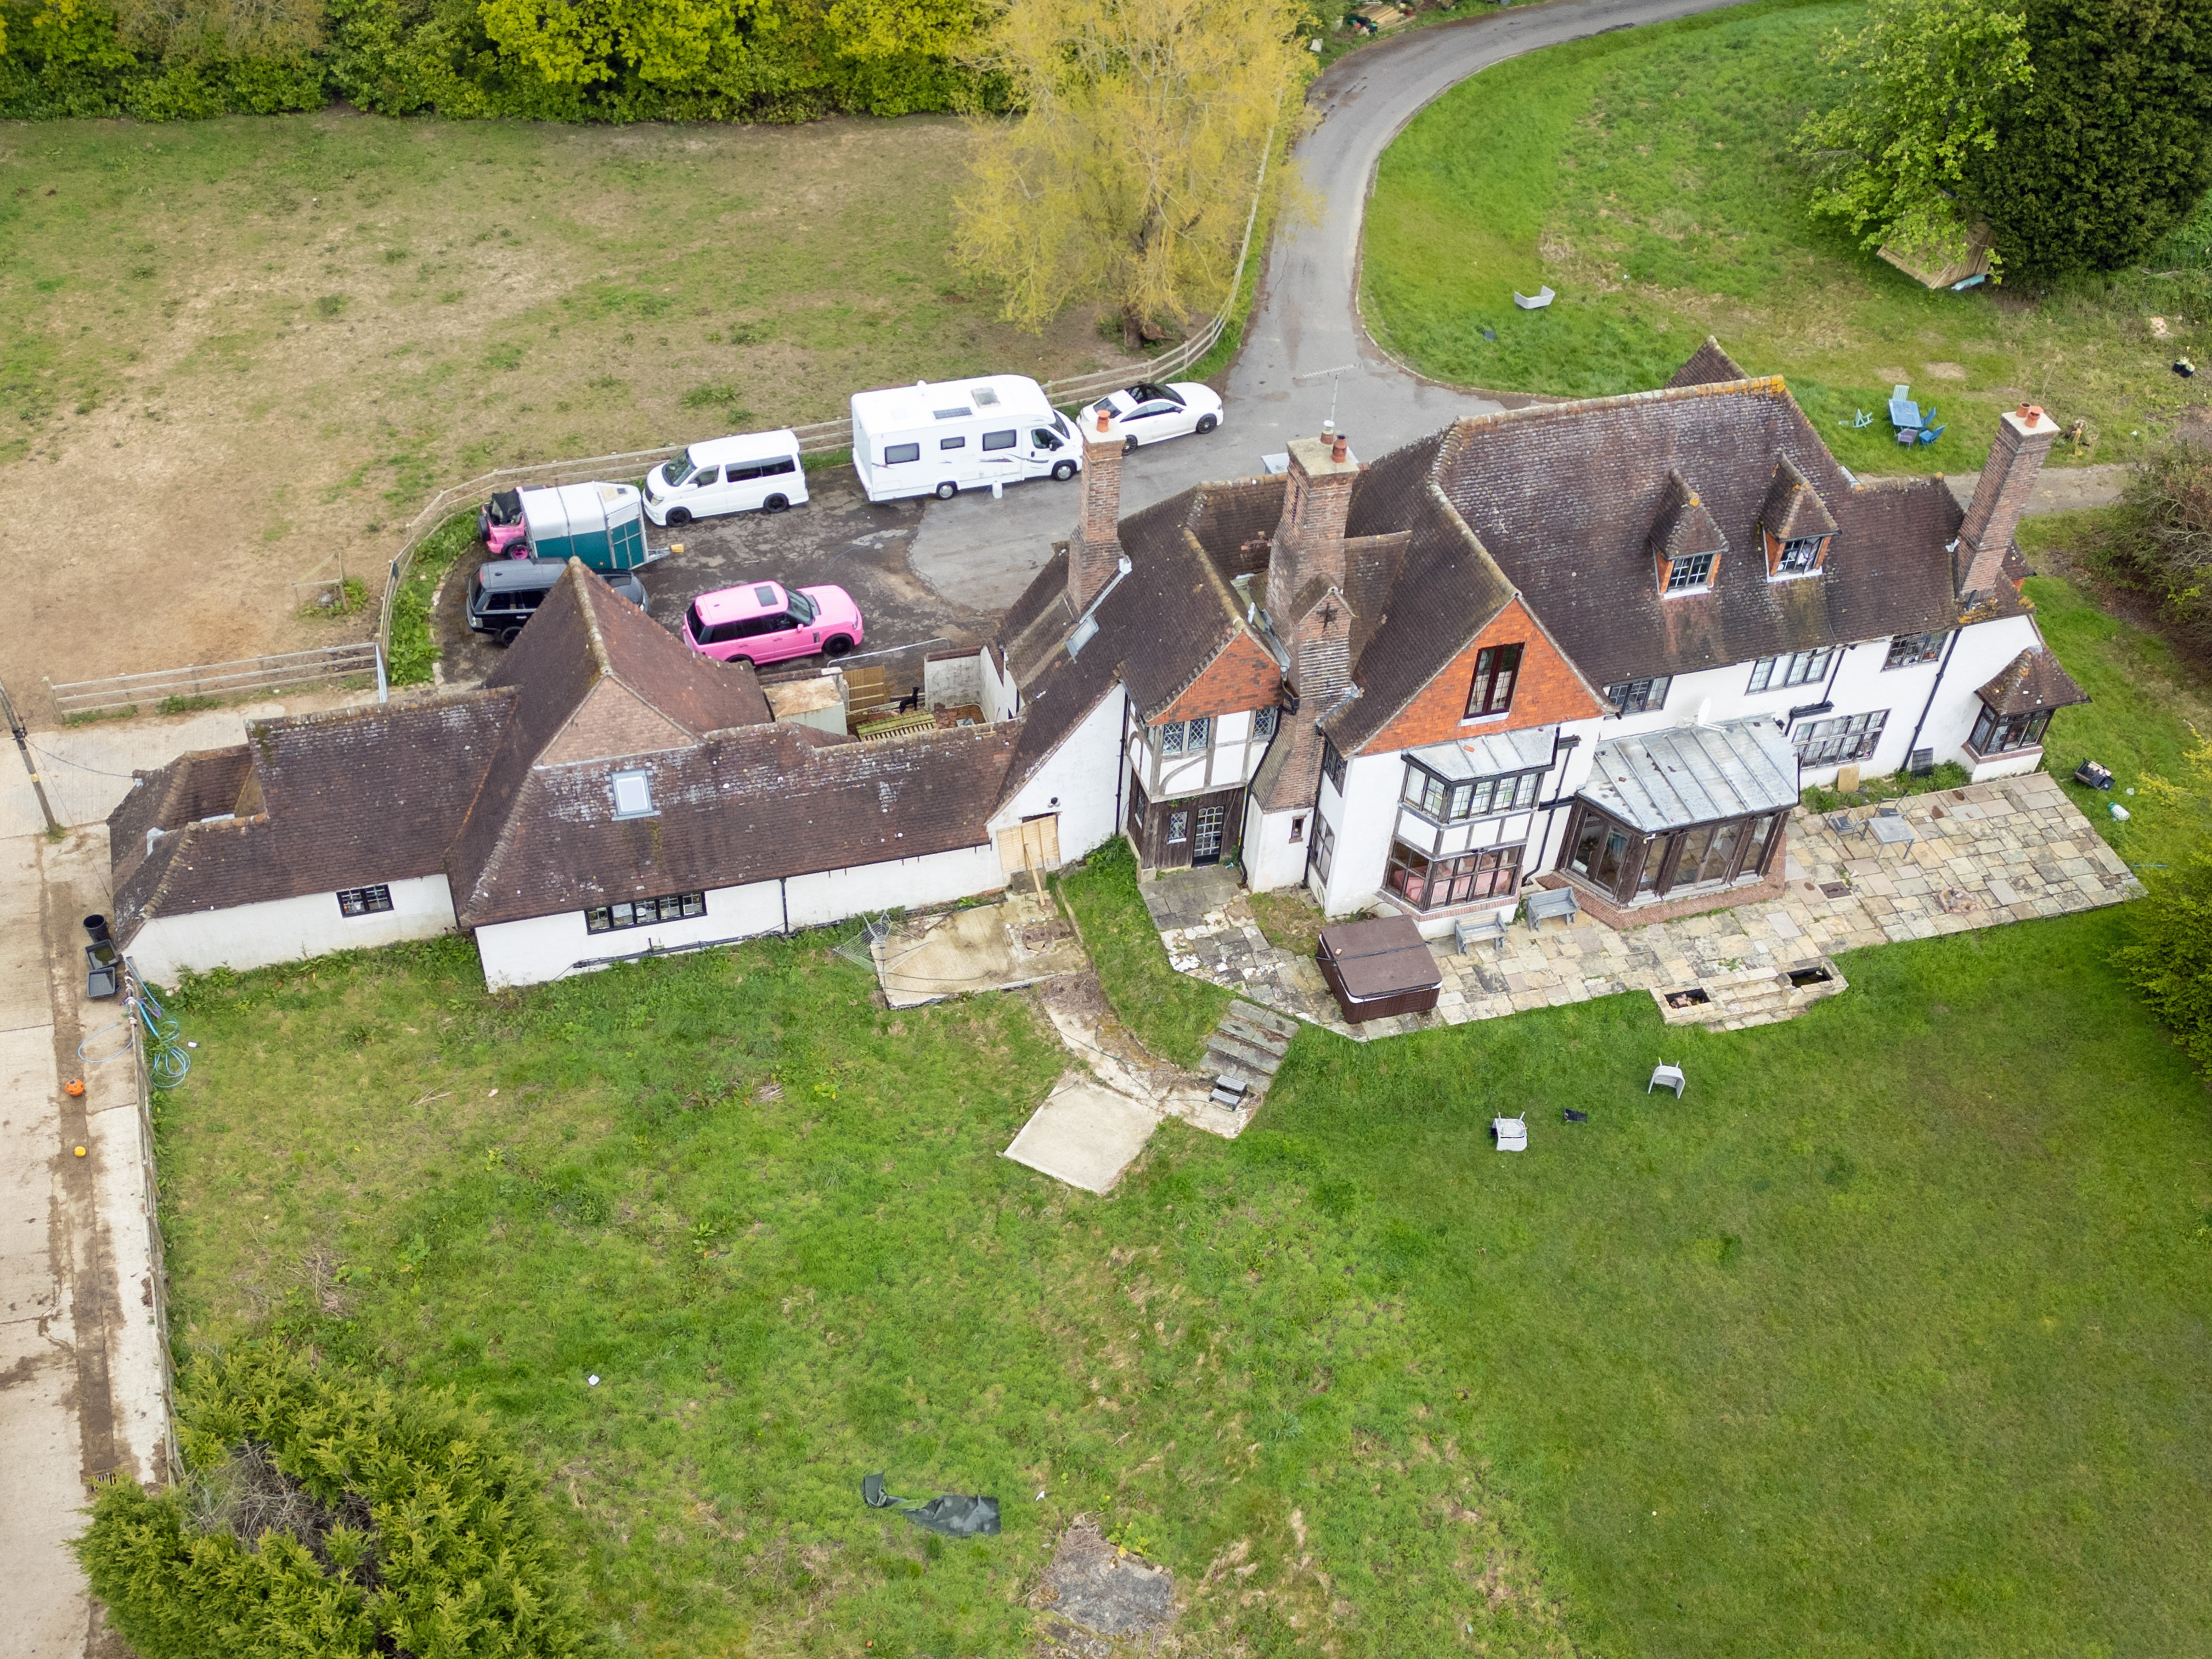 The West Sussex pad was featured on its own TV show